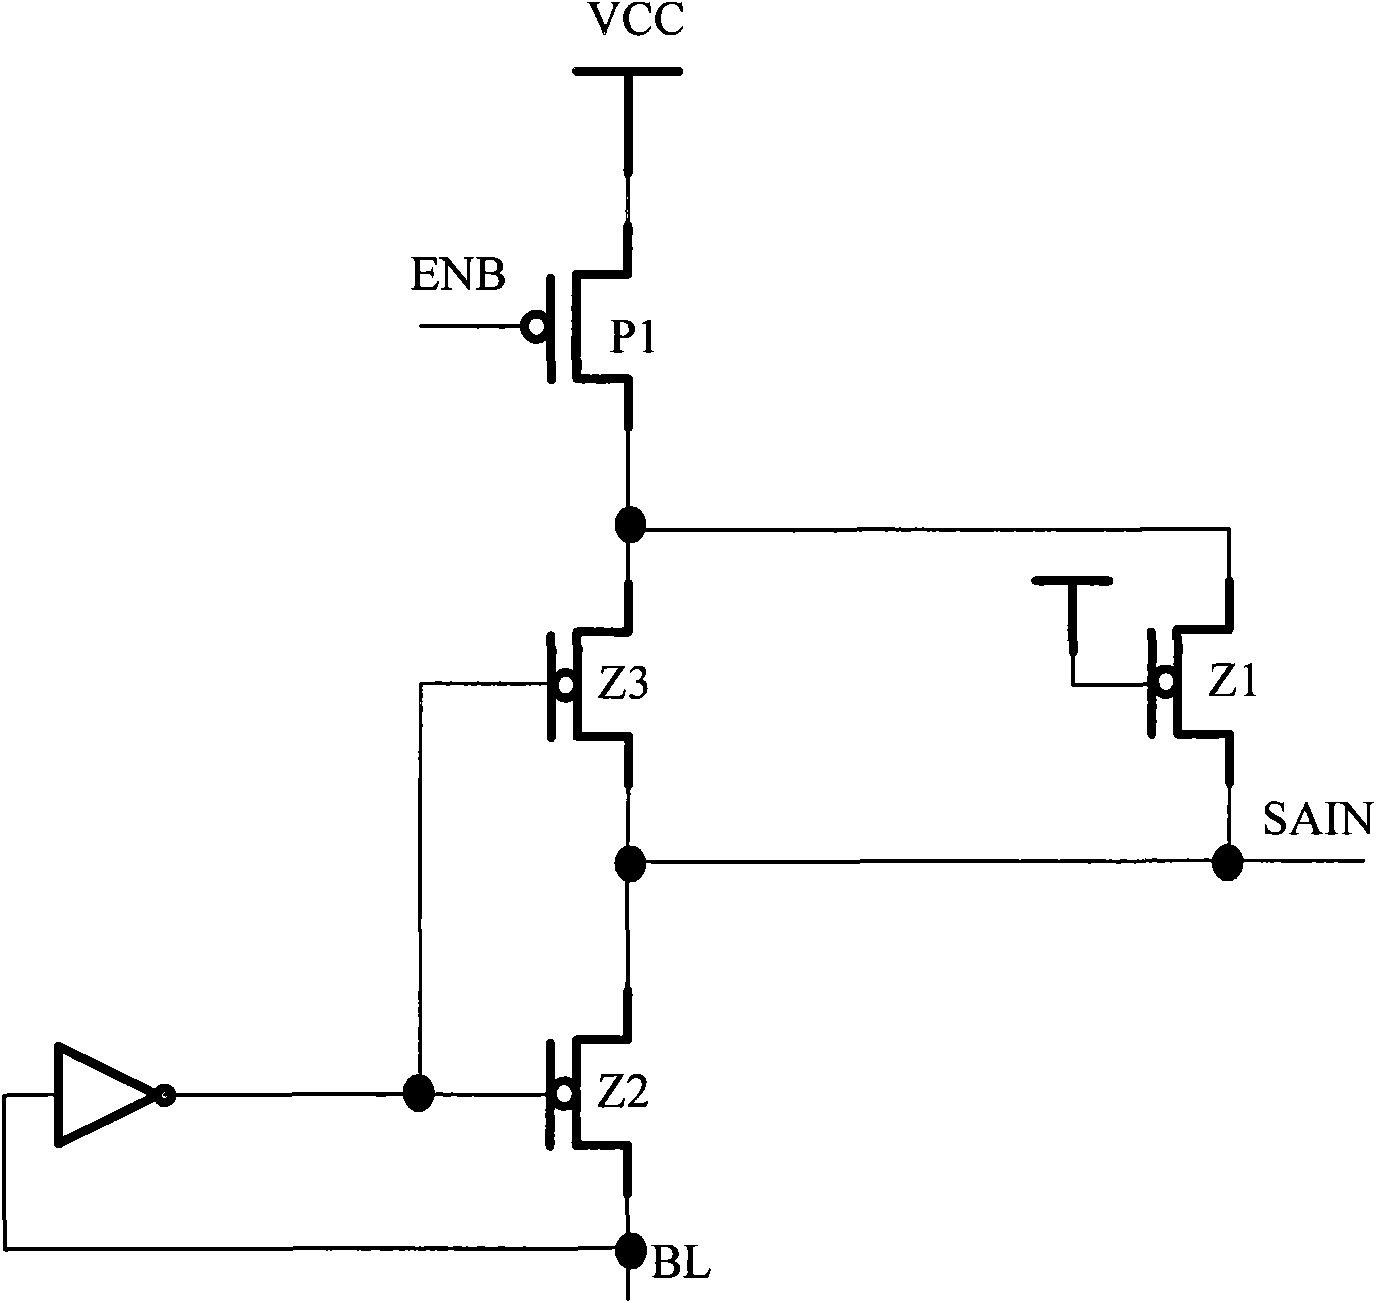 Sense amplifier for MLC flash memory and BL quick-charging circuit